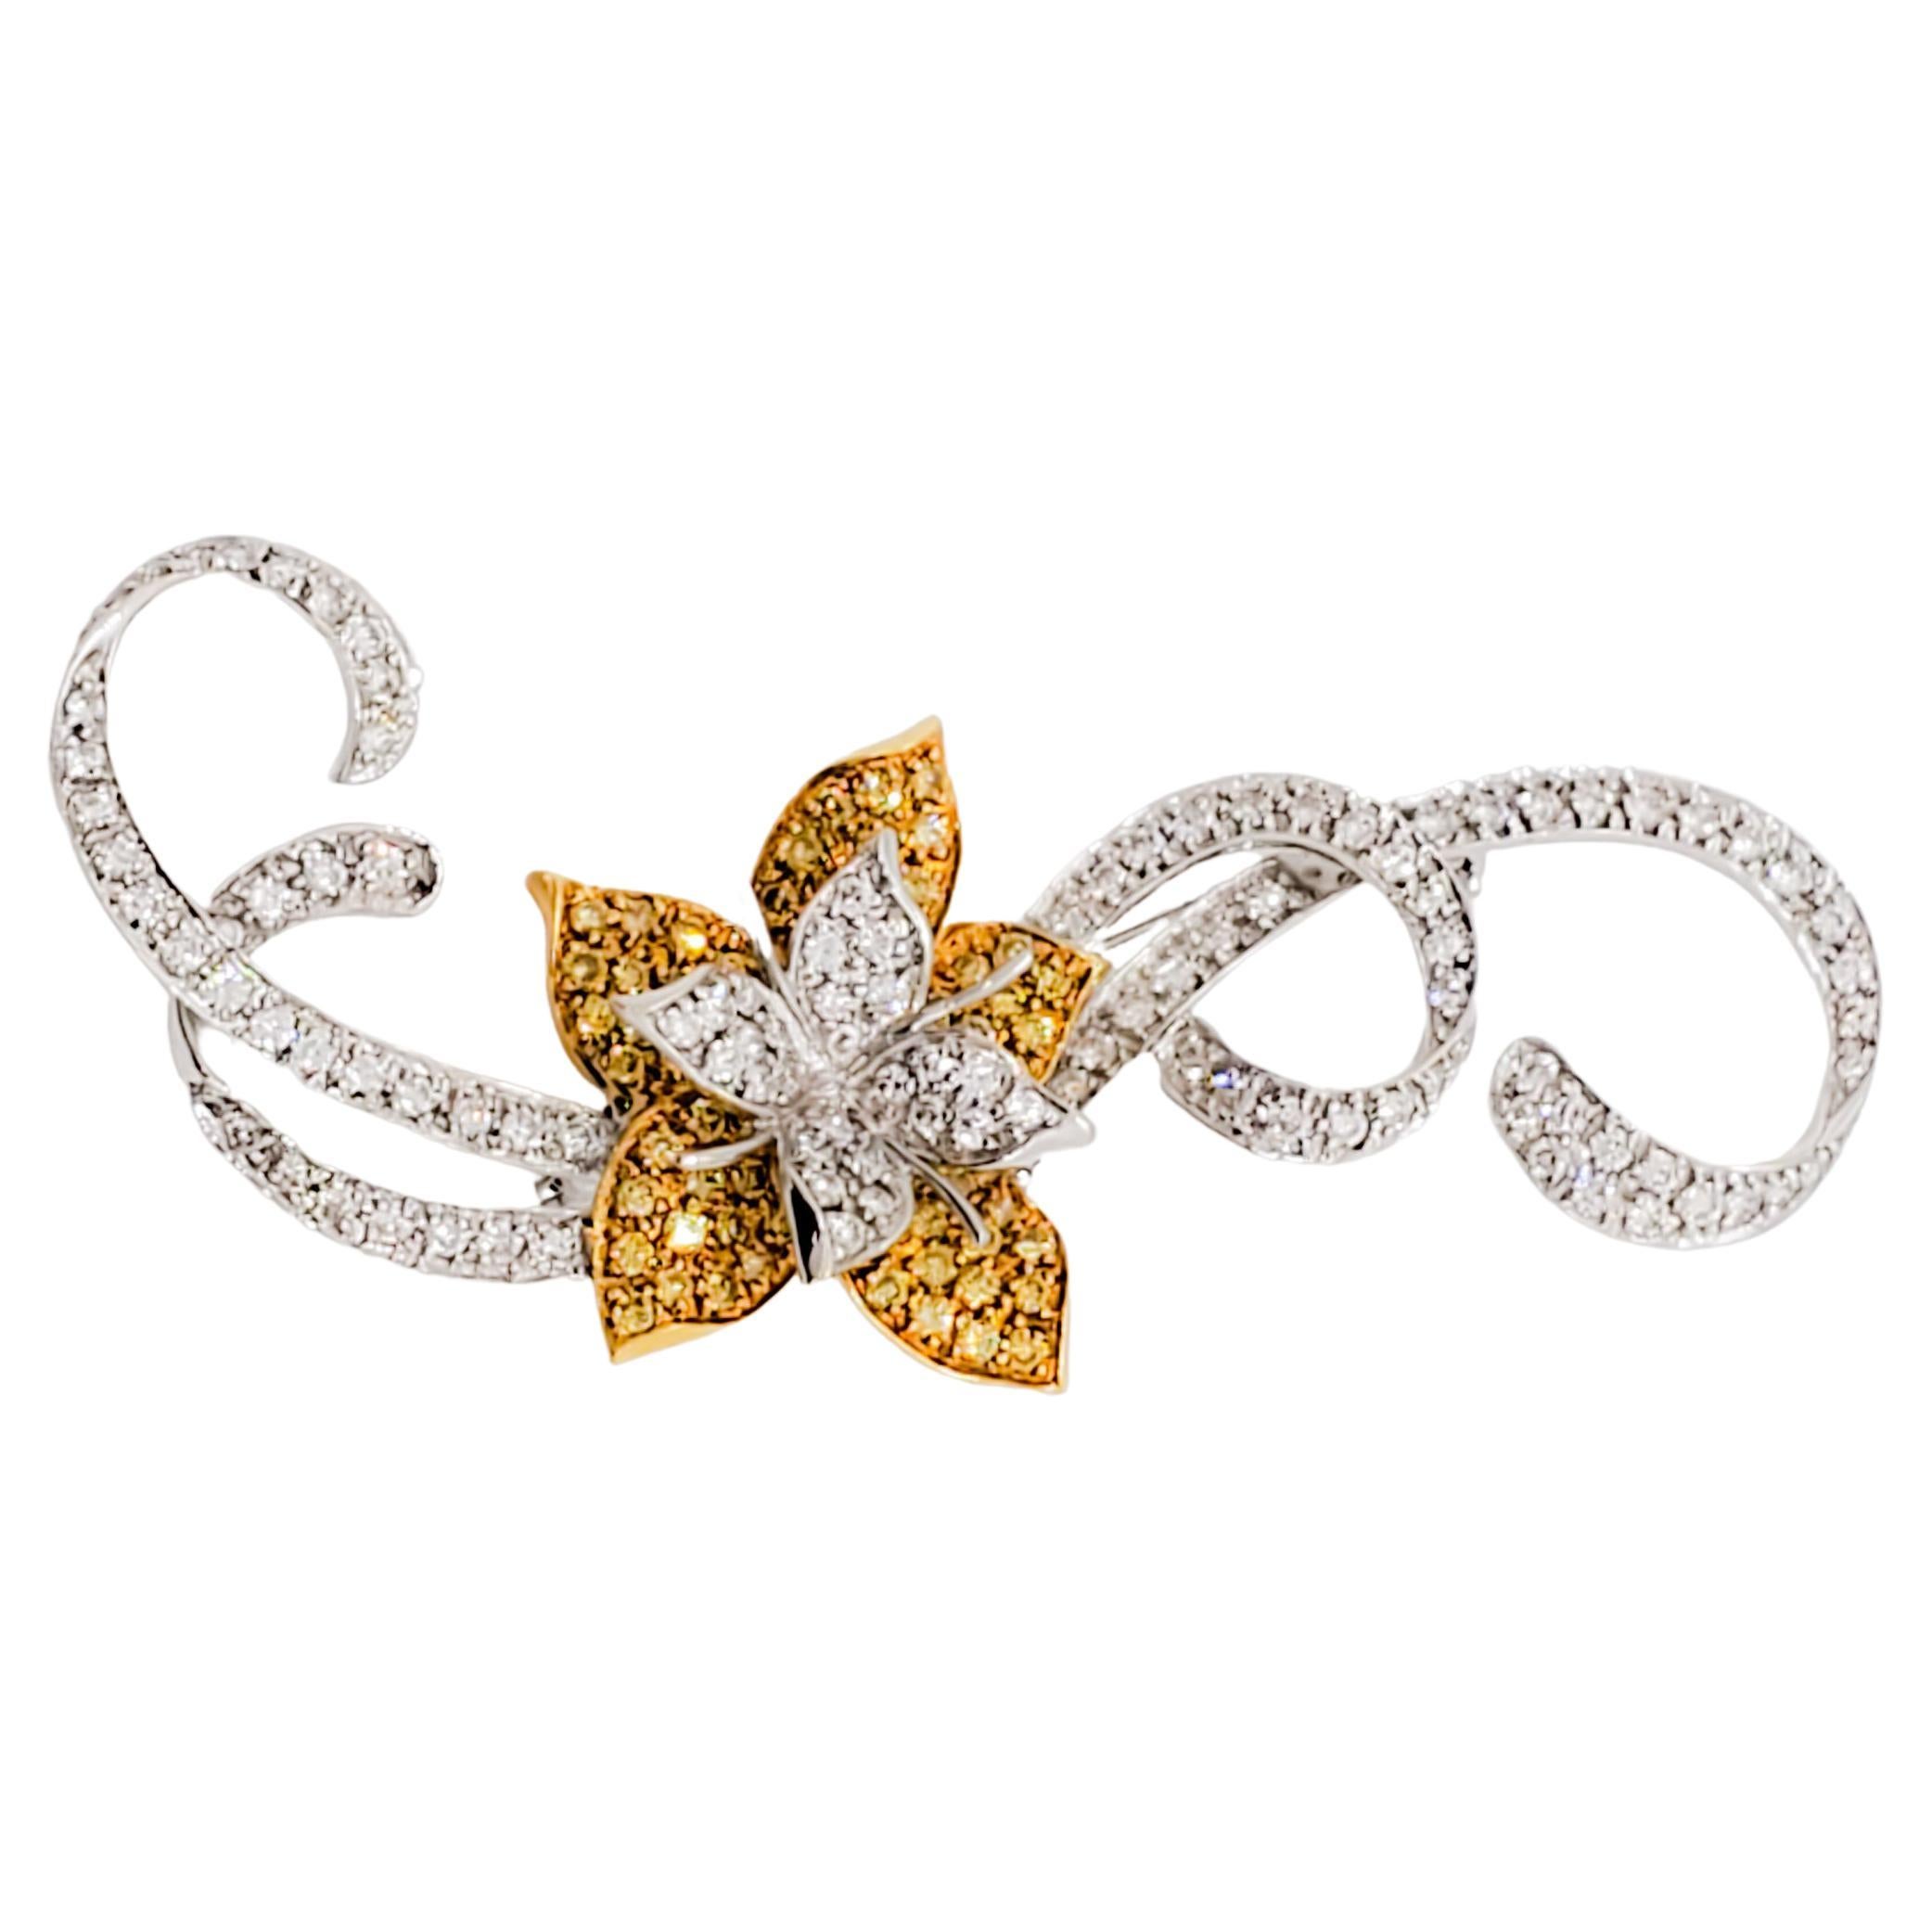 White and Yellow Diamond Flower Brooch in 18k Gold